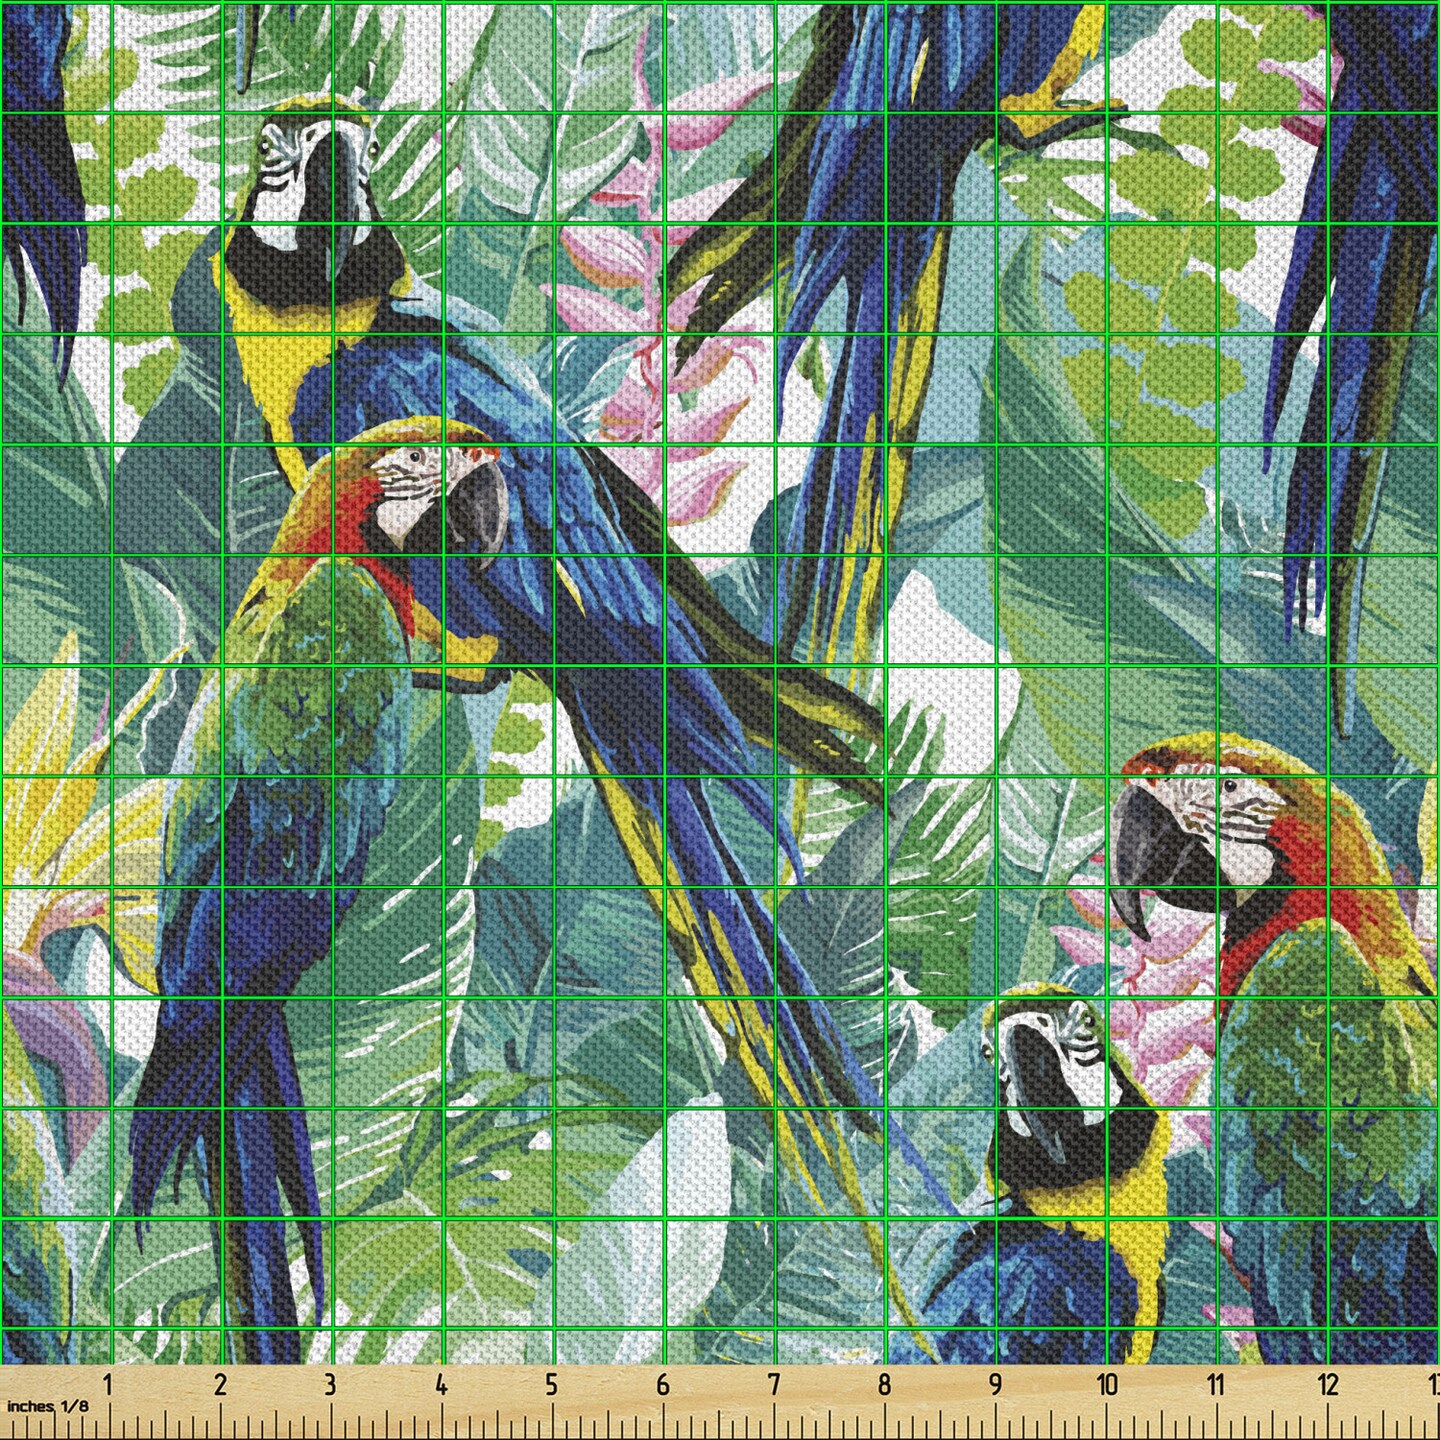 Ambesonne Birds Fabric by The Yard, Portrayal Illustration of Scarlet Macaw Parrots Among Exotic Plants in The Jungle, Decorative Satin Fabric for Home Textiles and Crafts, 3 Yards, Green Blue